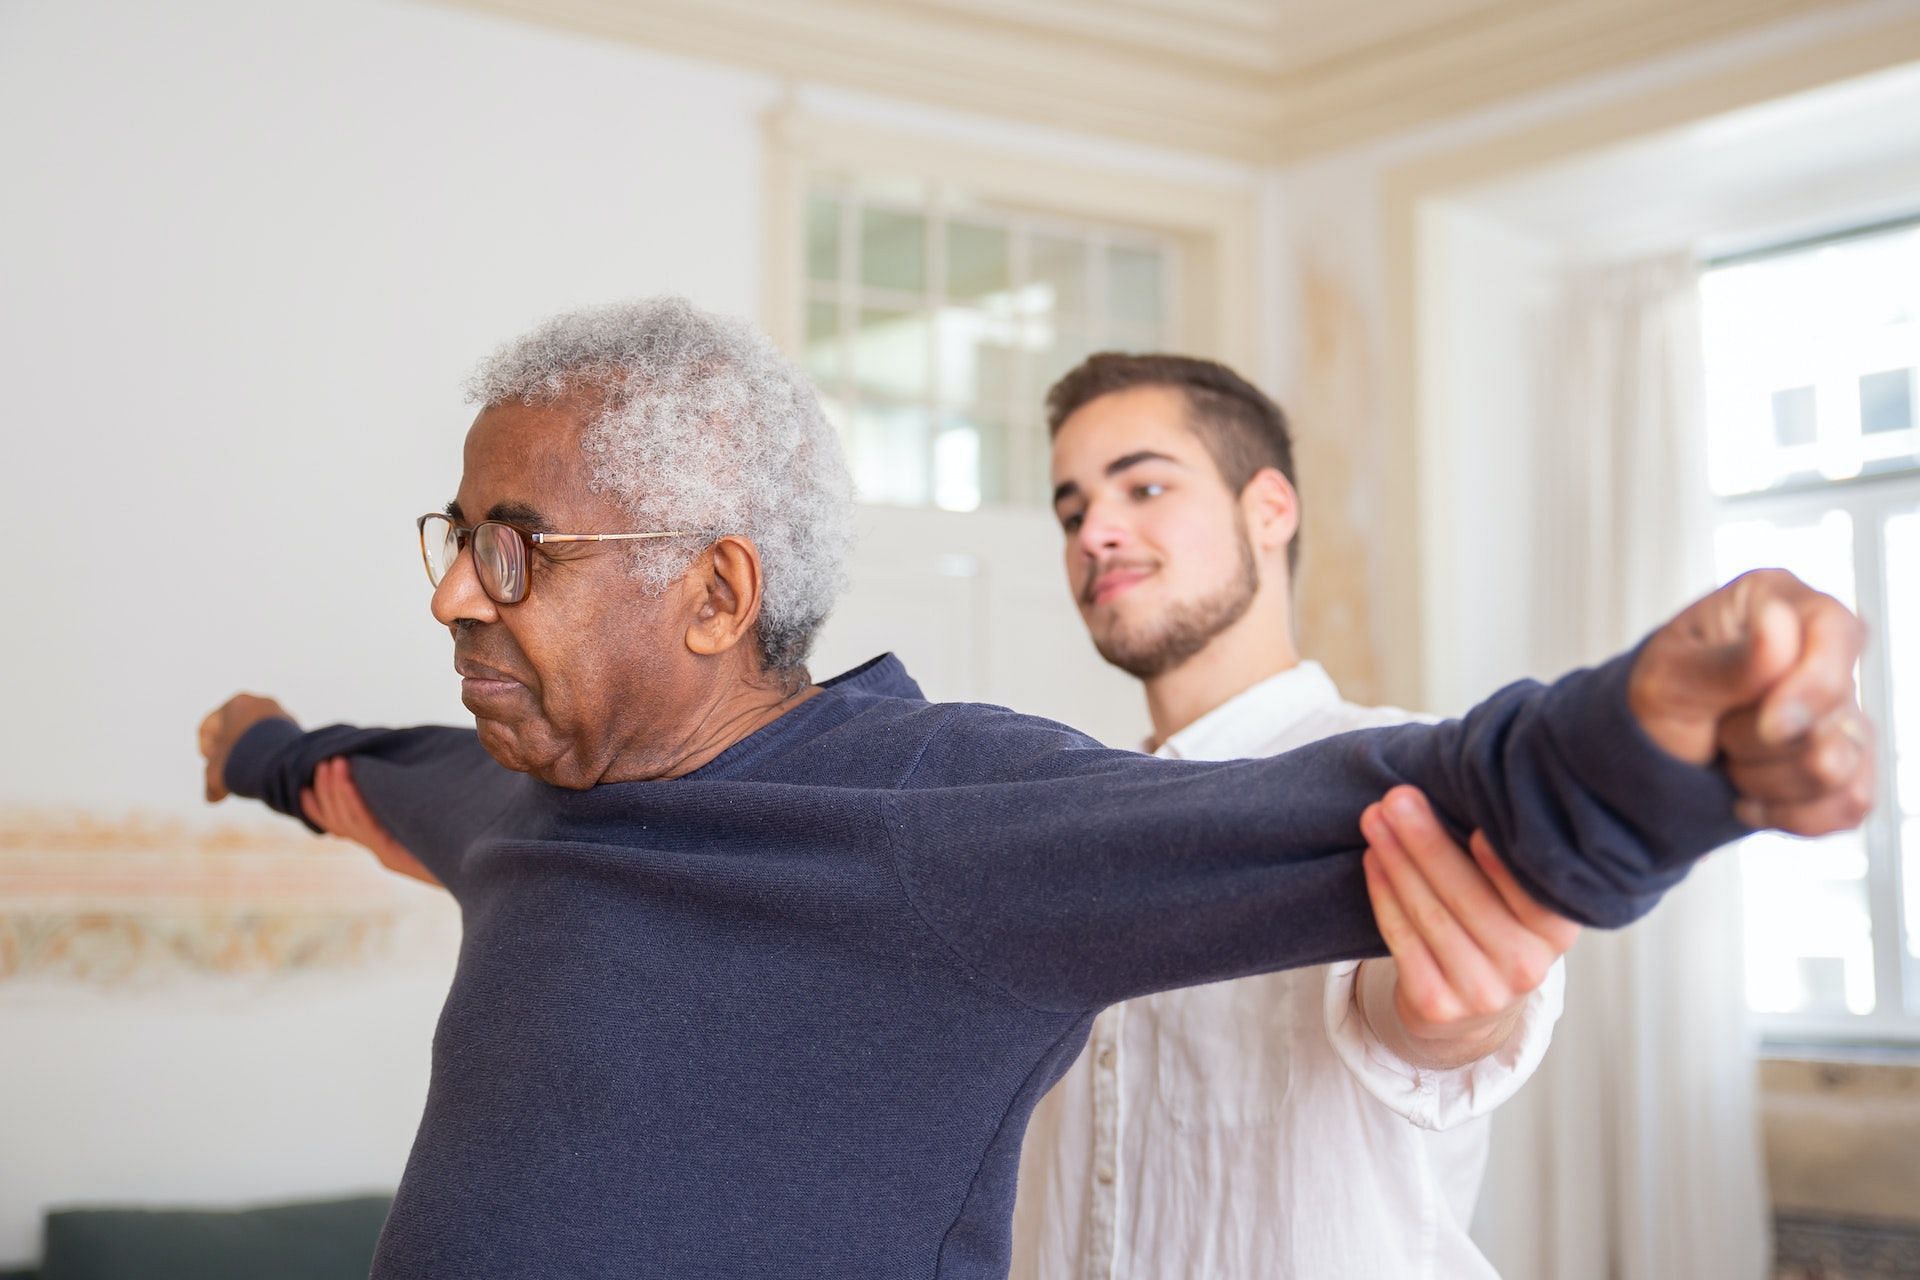 Balance exercises for seniors must always be done under supervision. (Photo via Pexels/Kampus Production)